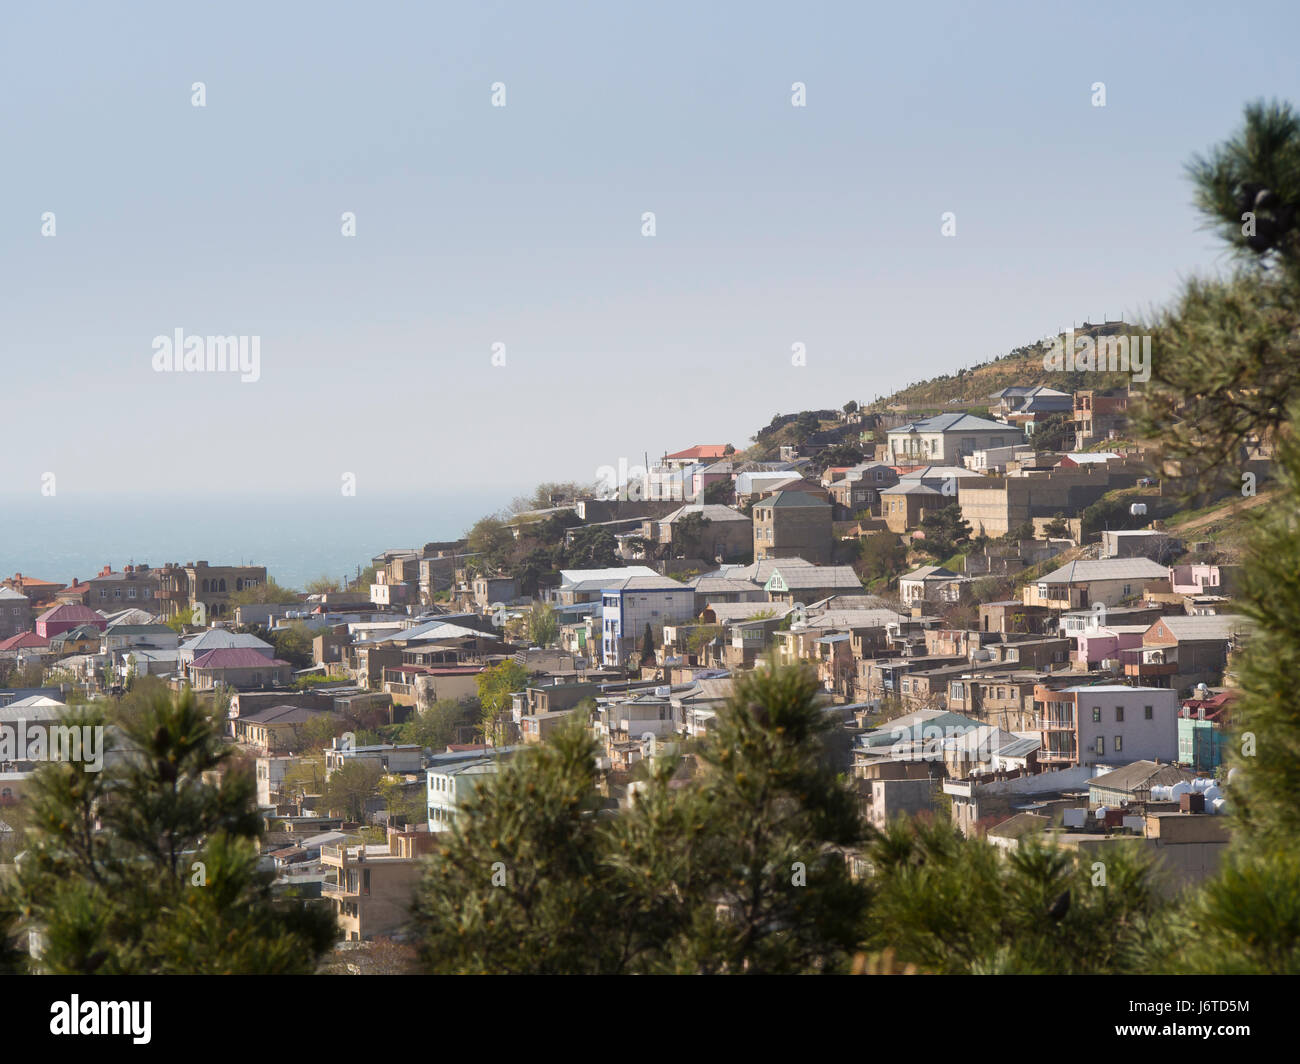 Baku, the capital city of Azerbaijan, on the shore of the Caspian sea, view of the Bayil residential district from the Dagustu park Stock Photo